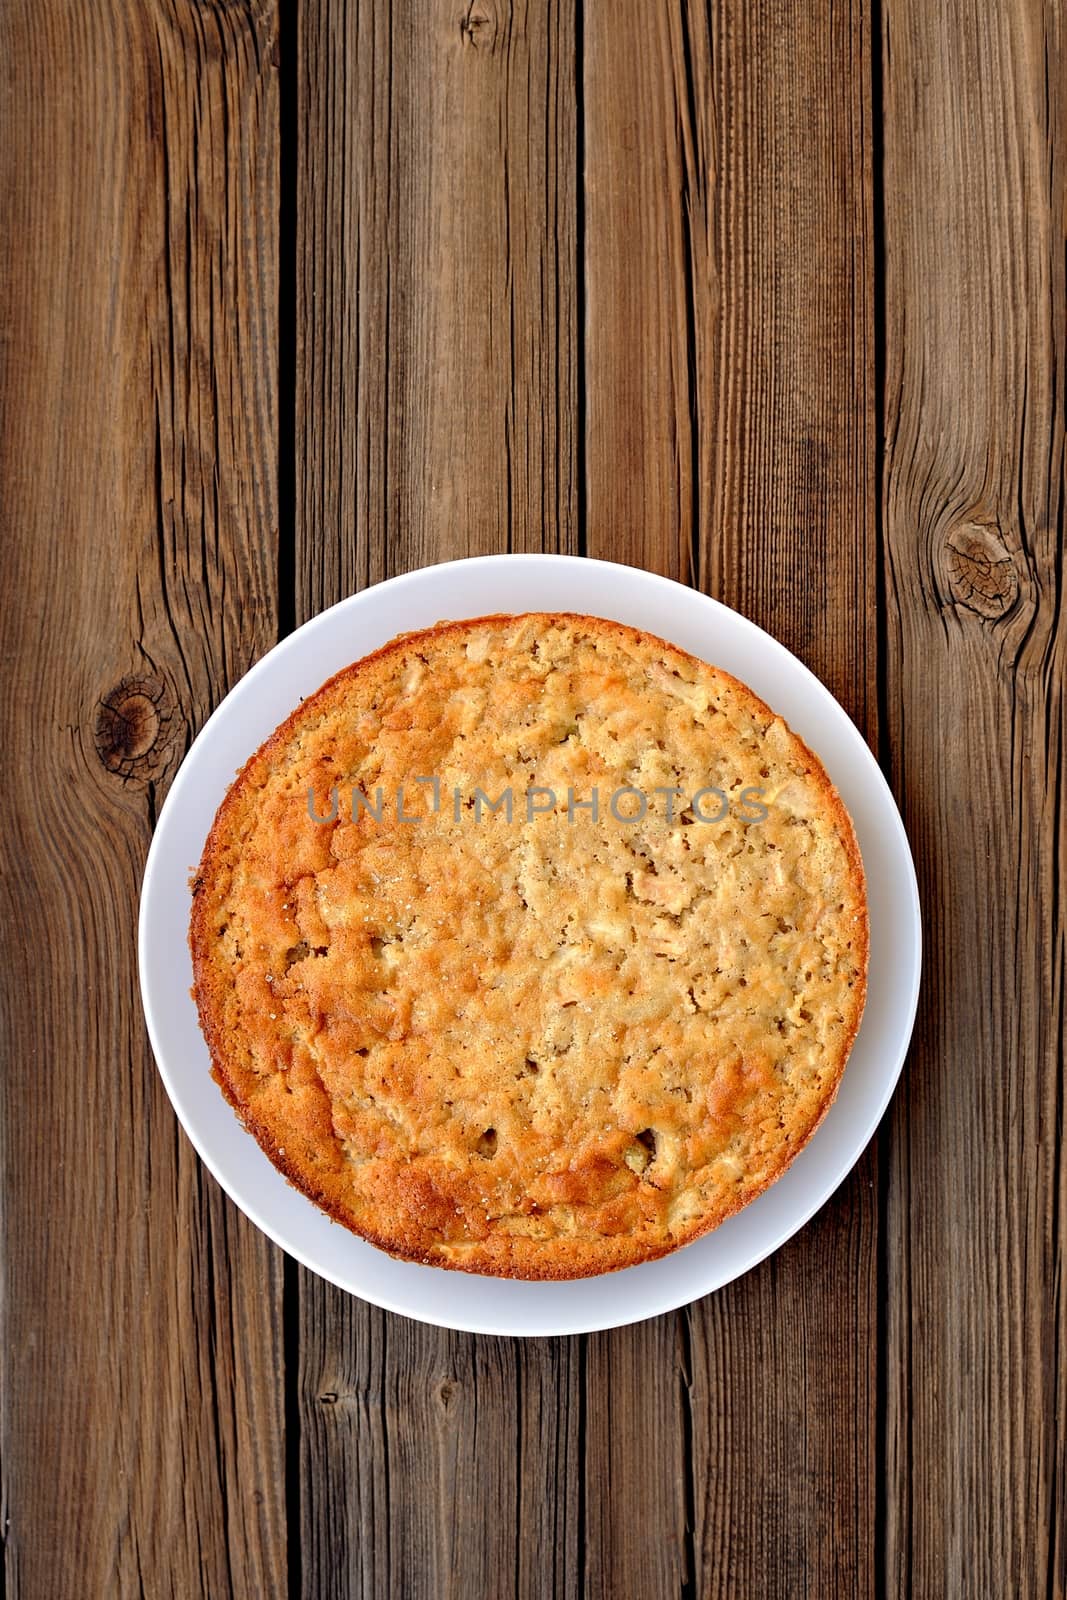 Old-fashioned apple pie on a wooden background by Borodin